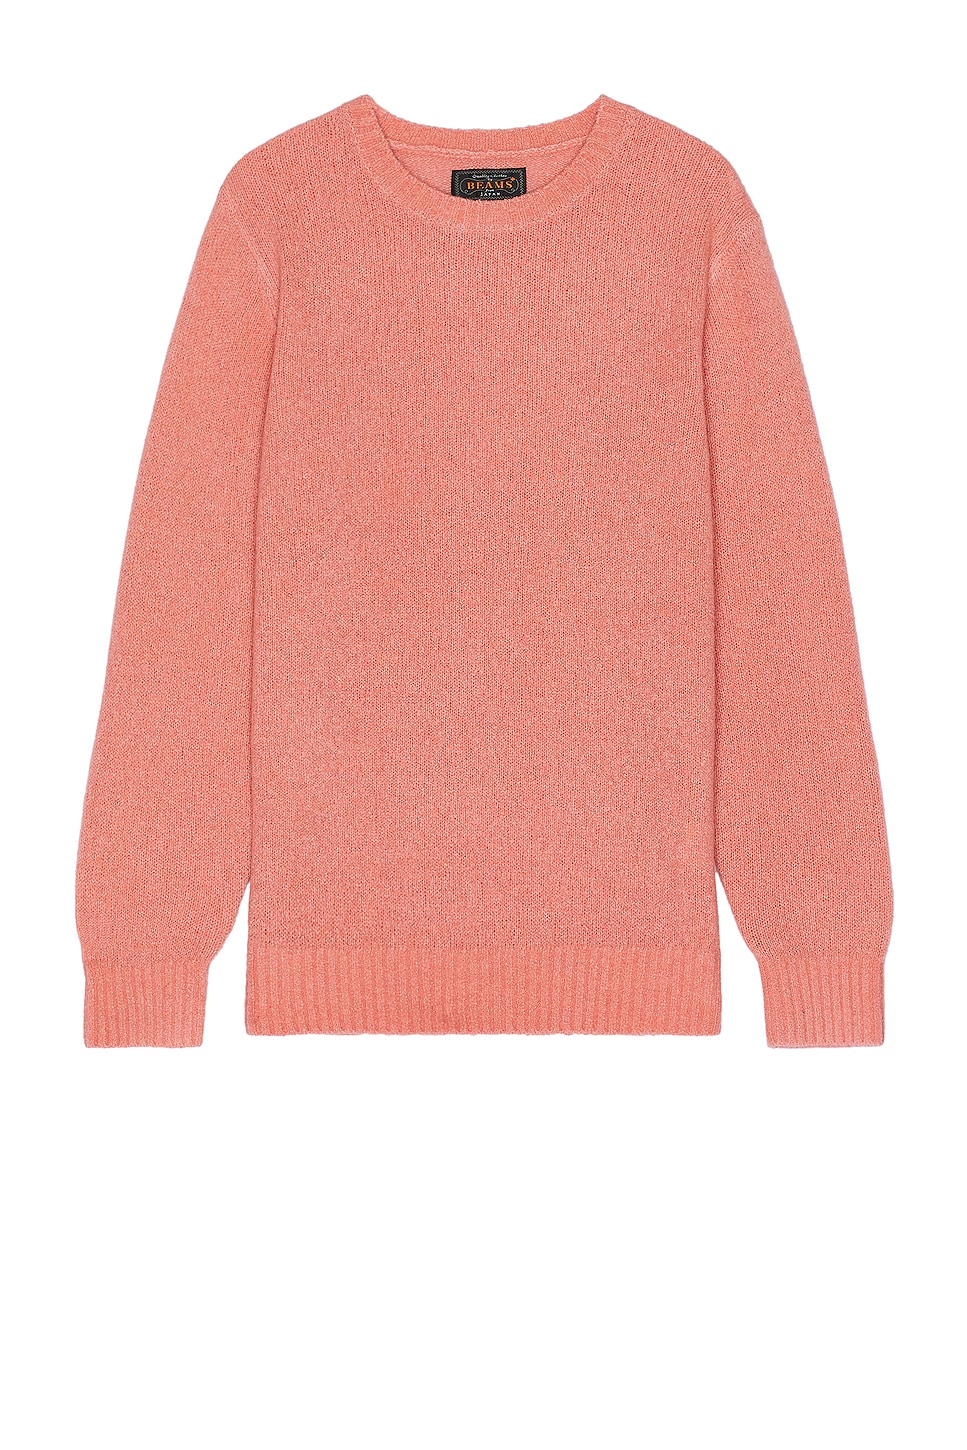 Image 1 of Beams Plus Crew Cashmere Sweater in Pink